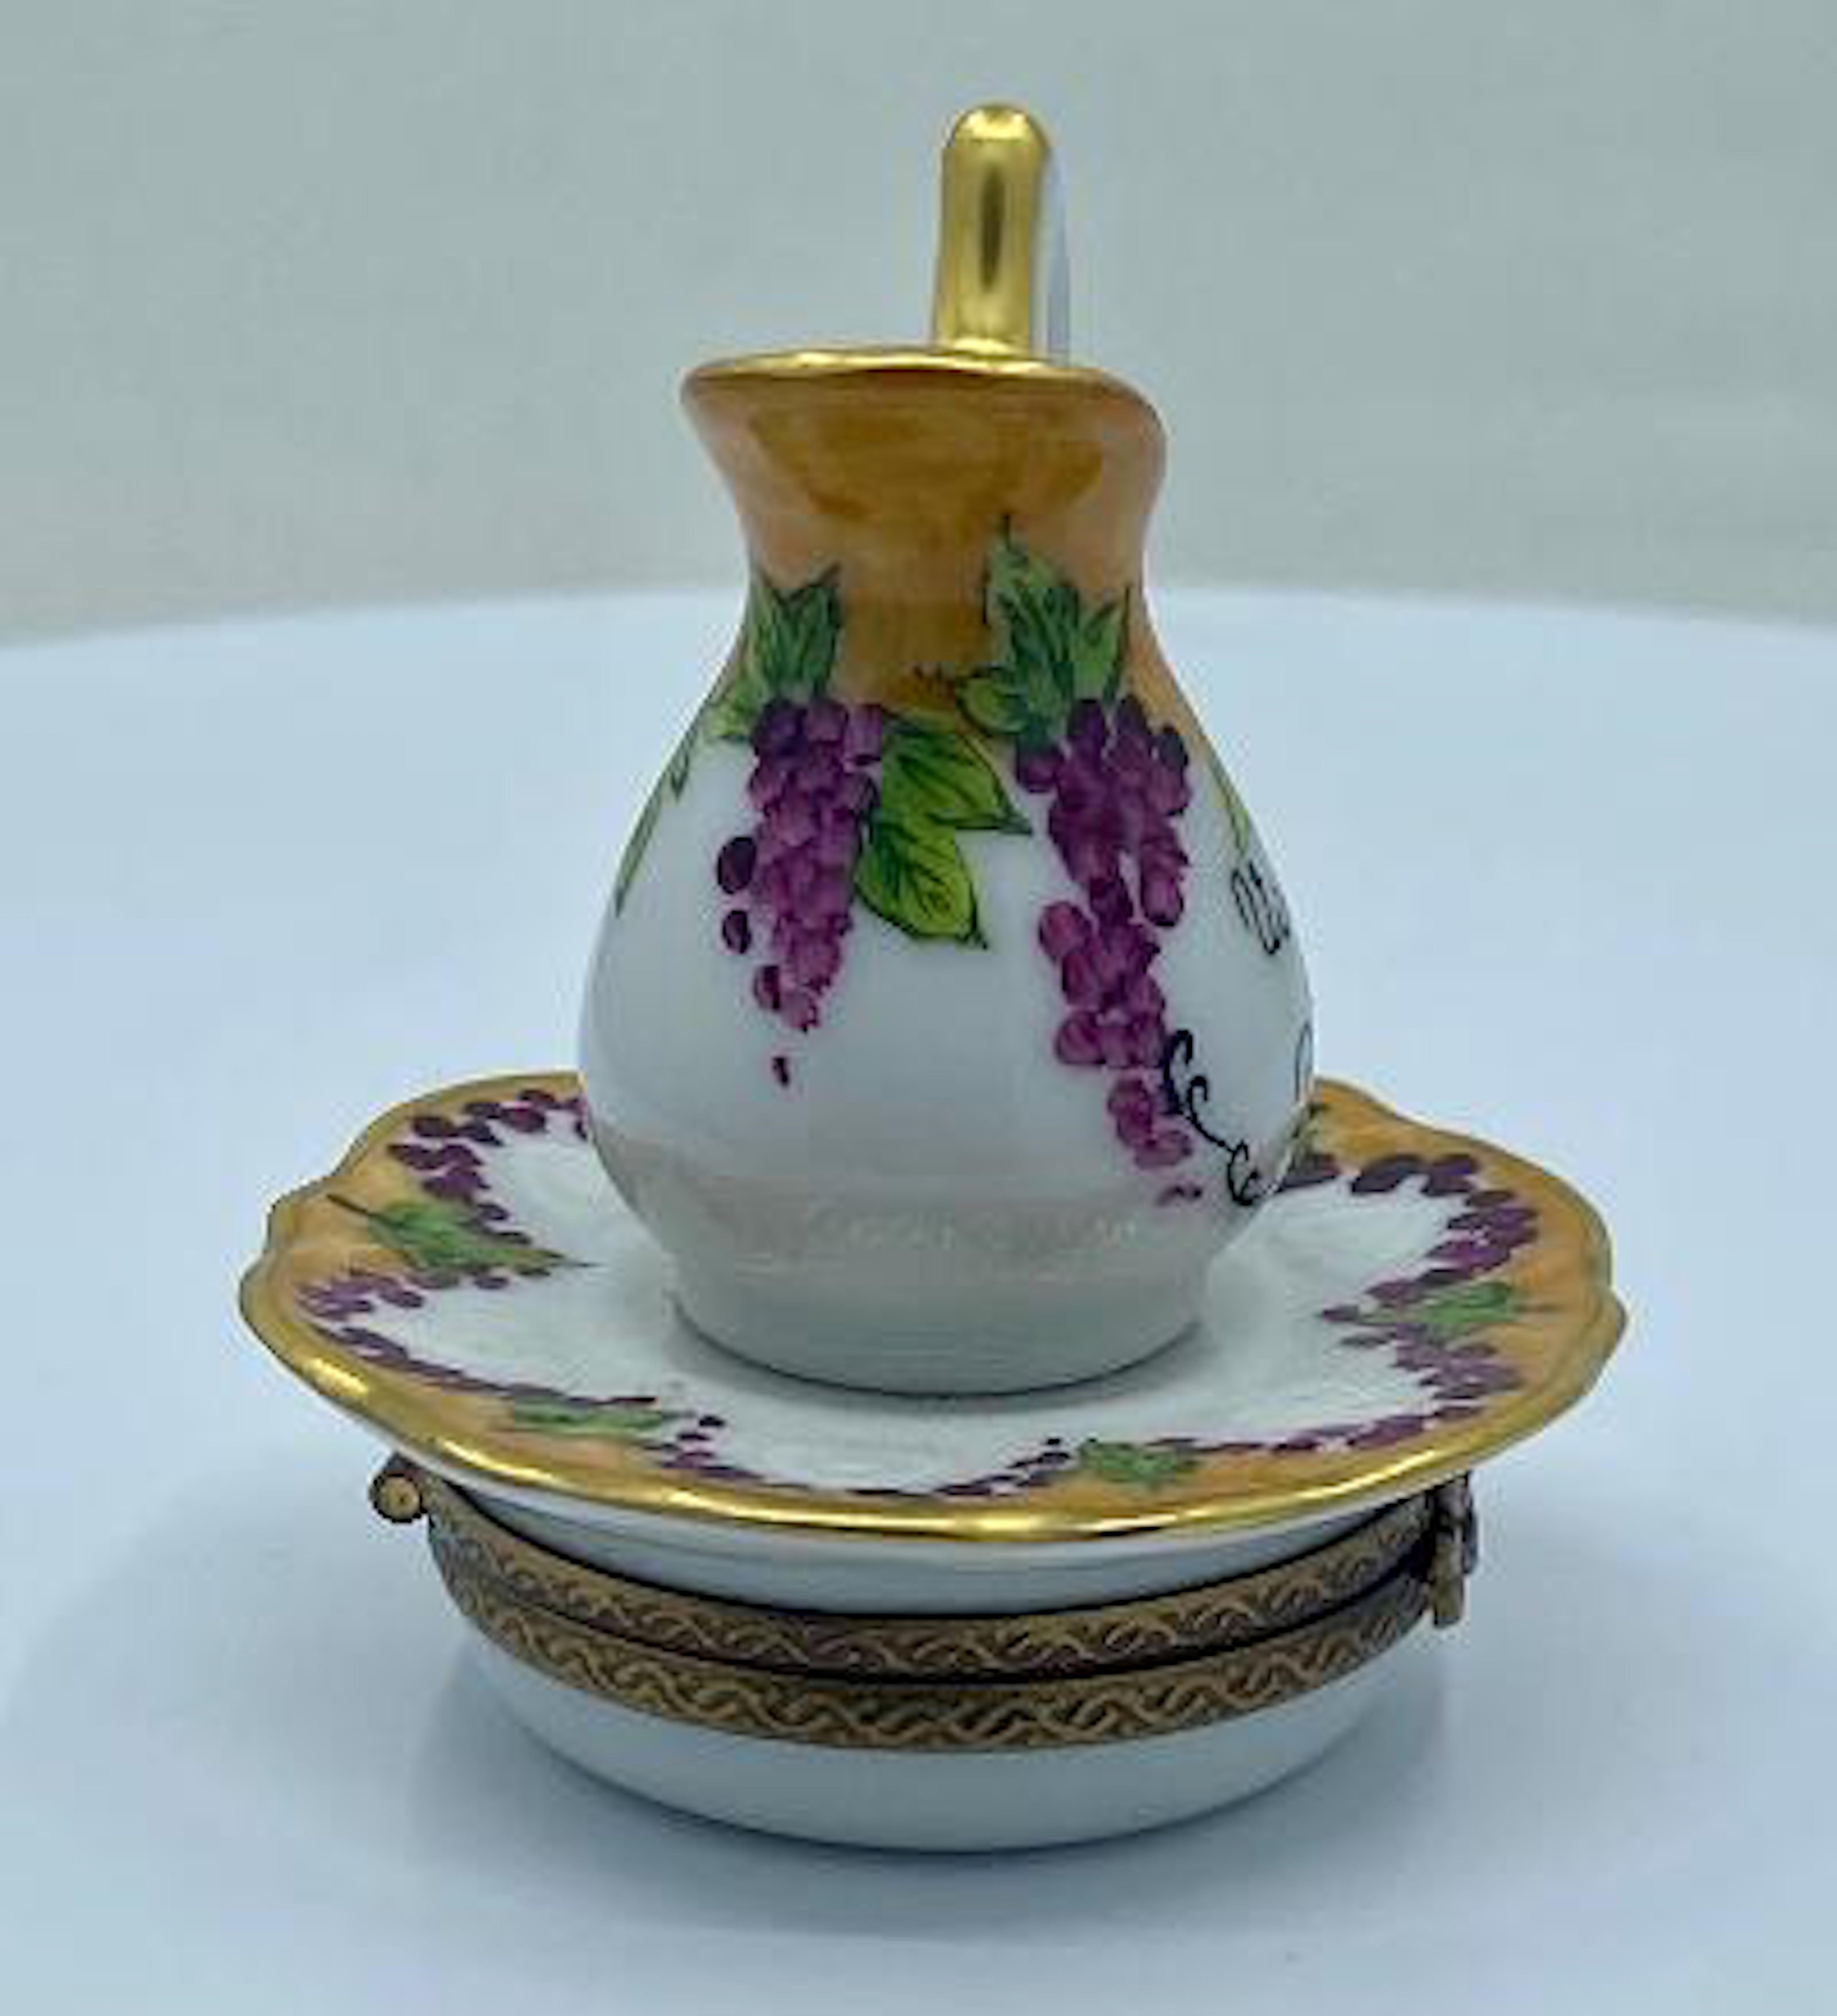 Collectible Limoges porcelain miniature trinket box is handmade and hand painted in France and features beautifully hand painted grapes and vines on the wine pitcher with an attached plate on the bottom of the box. Rich hand painted 24-karat gold